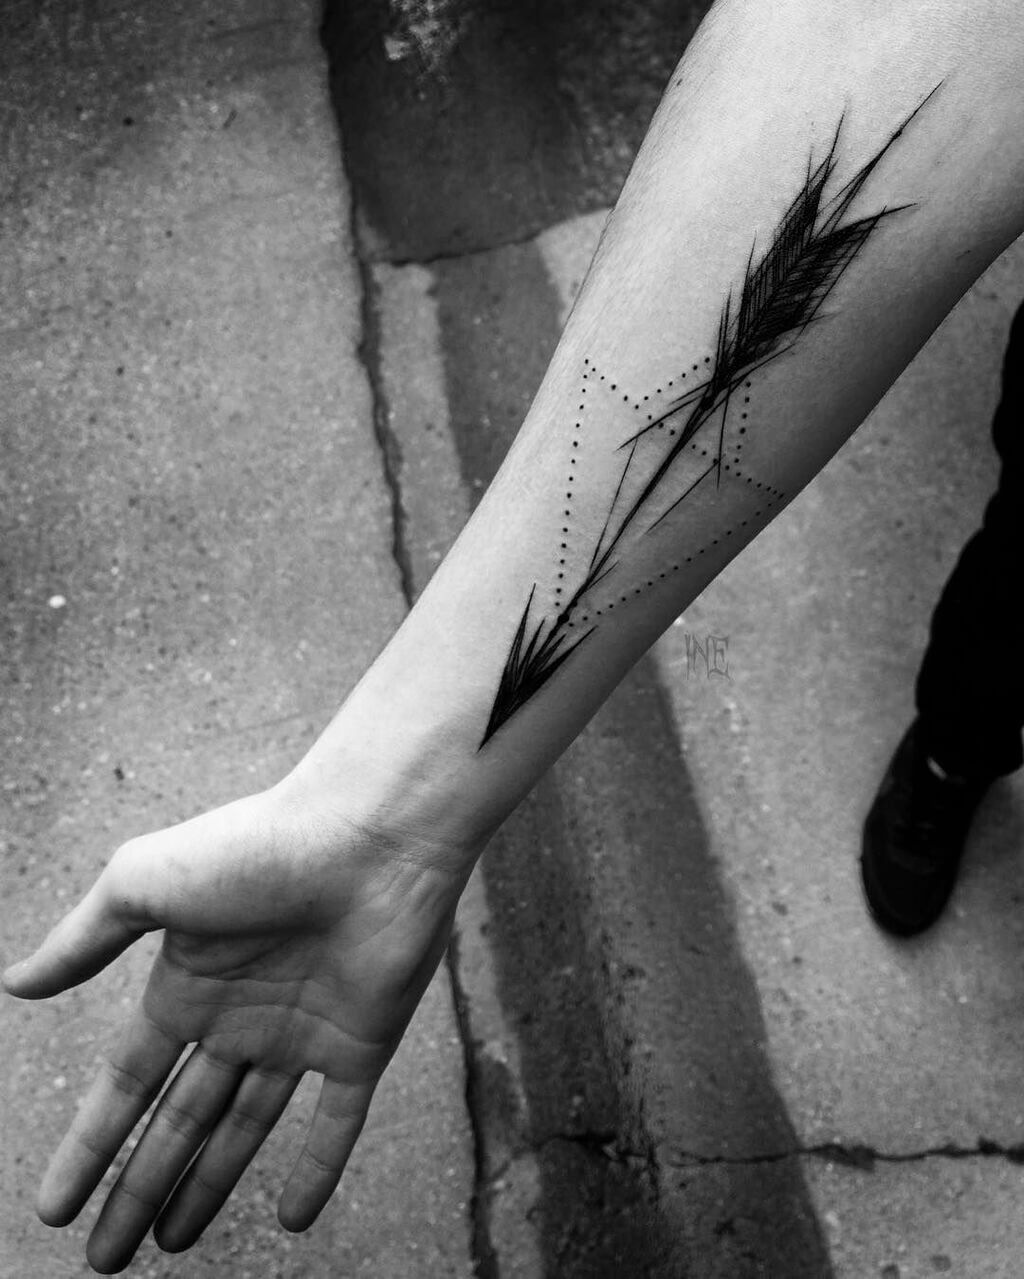 50 Unique And Beautiful Arrow Tattoo Designs With Meanings